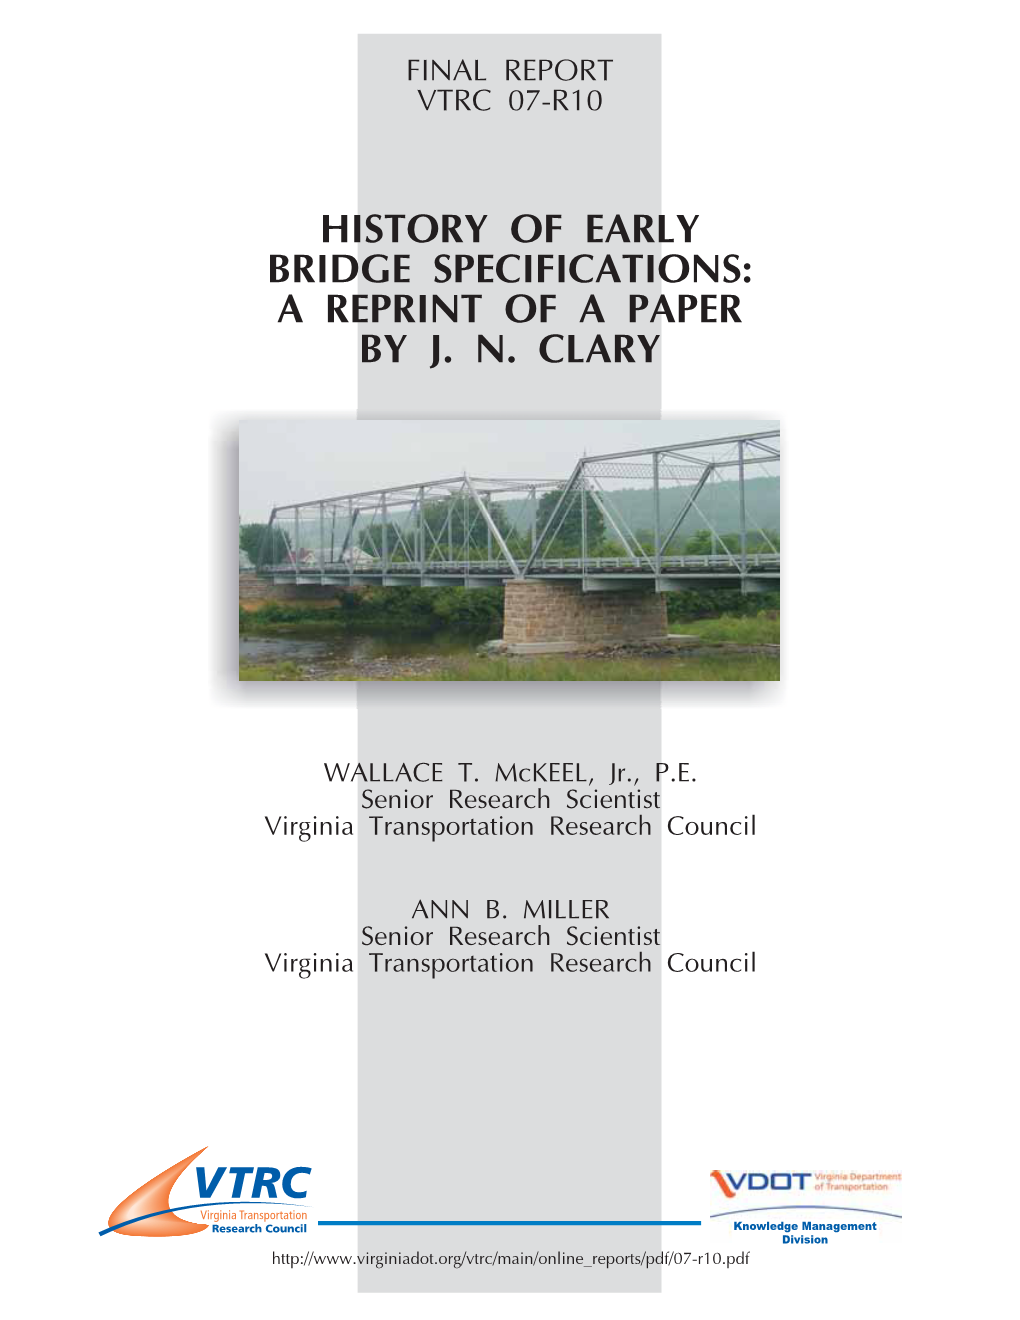 History of Early Bridge Specifications: a Reprint of a Paper by J